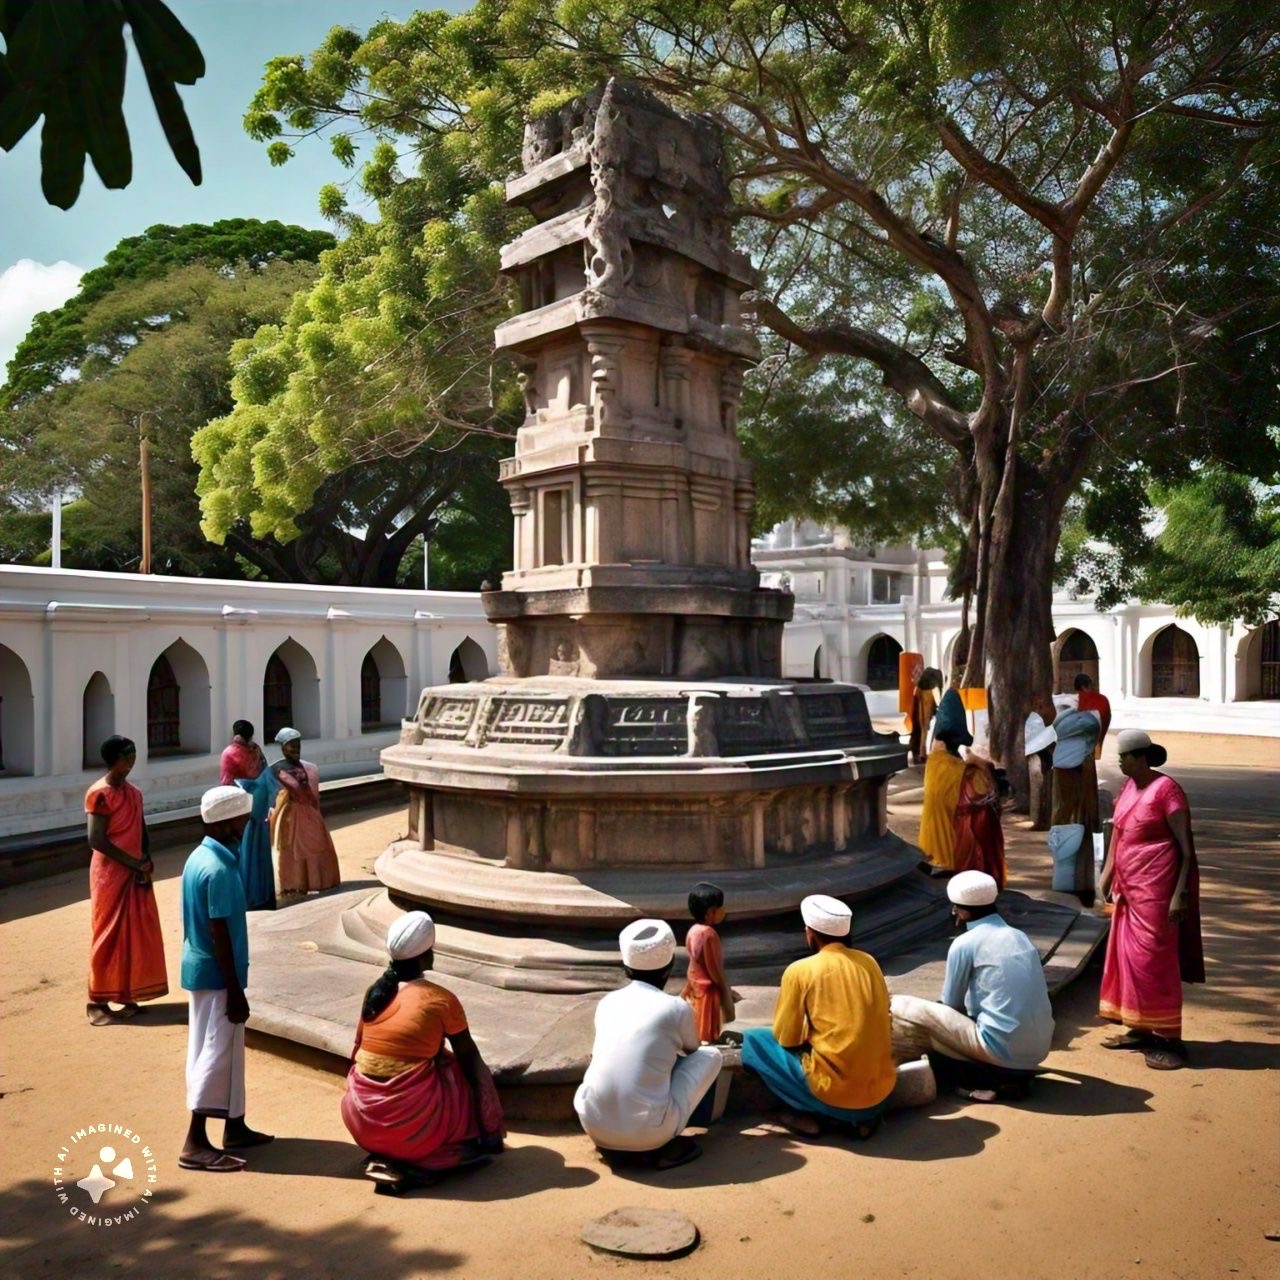 Top 10 Things to do in Jaffna: This is Sri Lanka